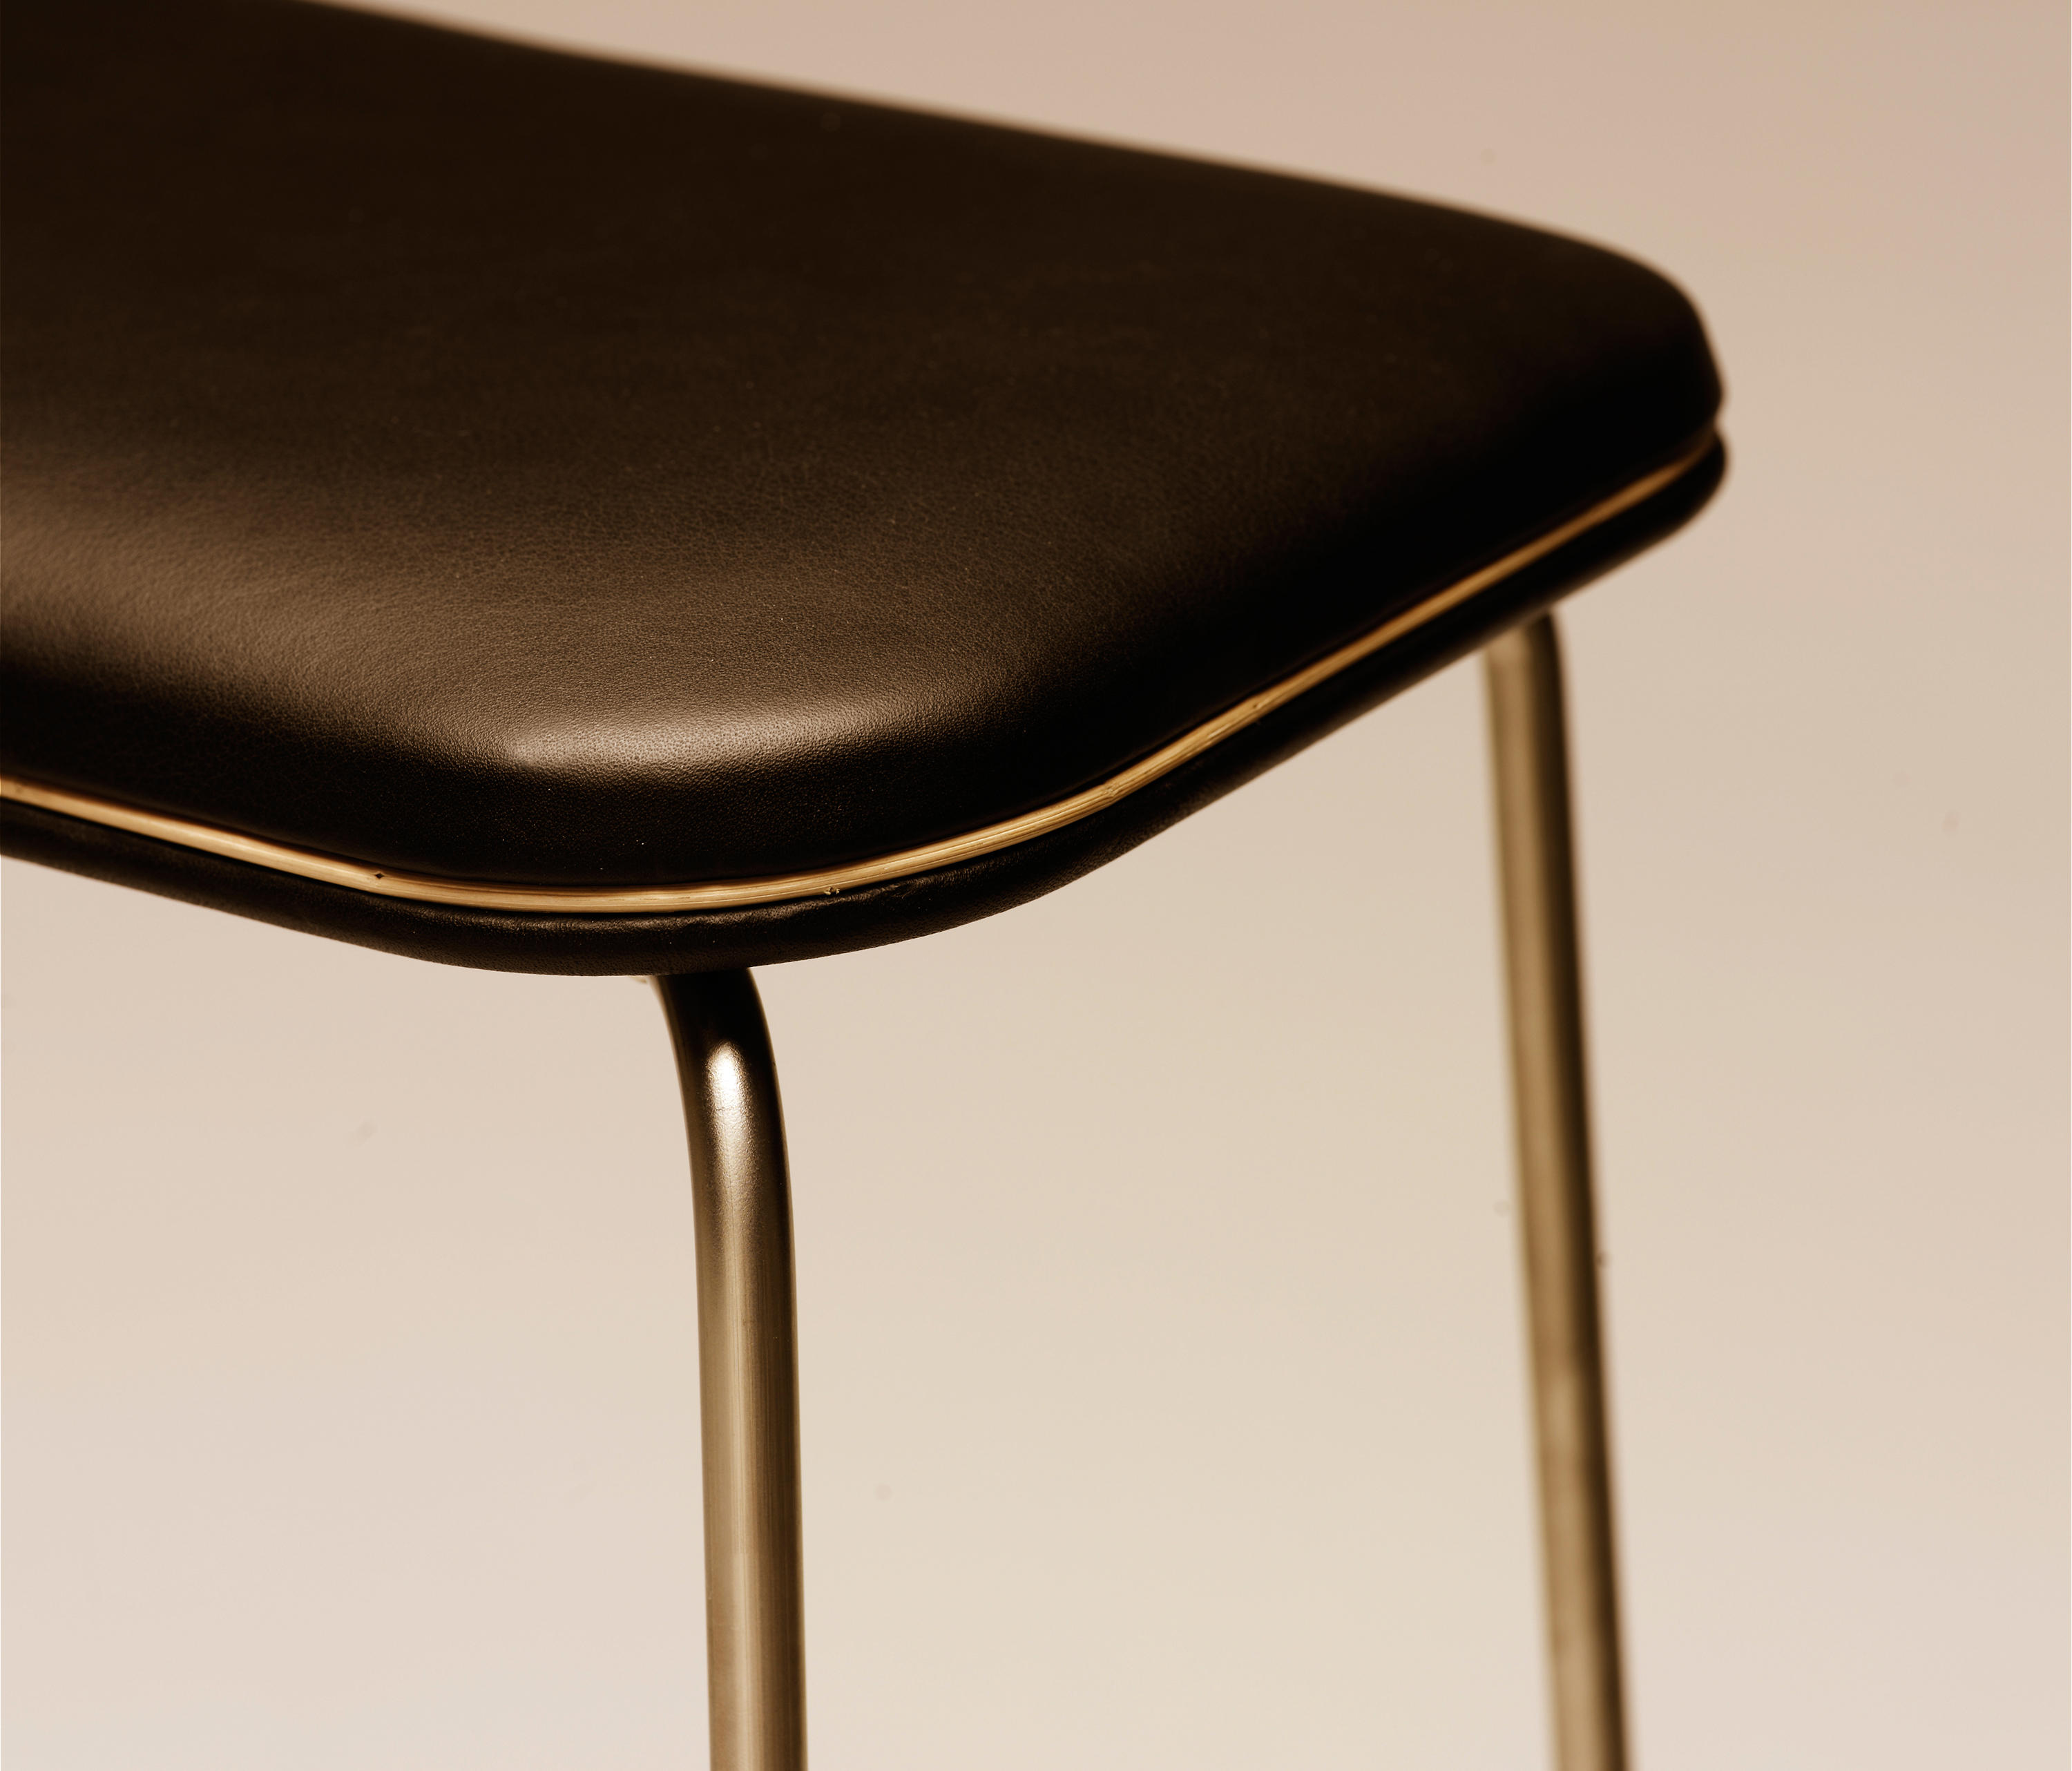 P.1 430 - Stools from PWH Furniture | Architonic